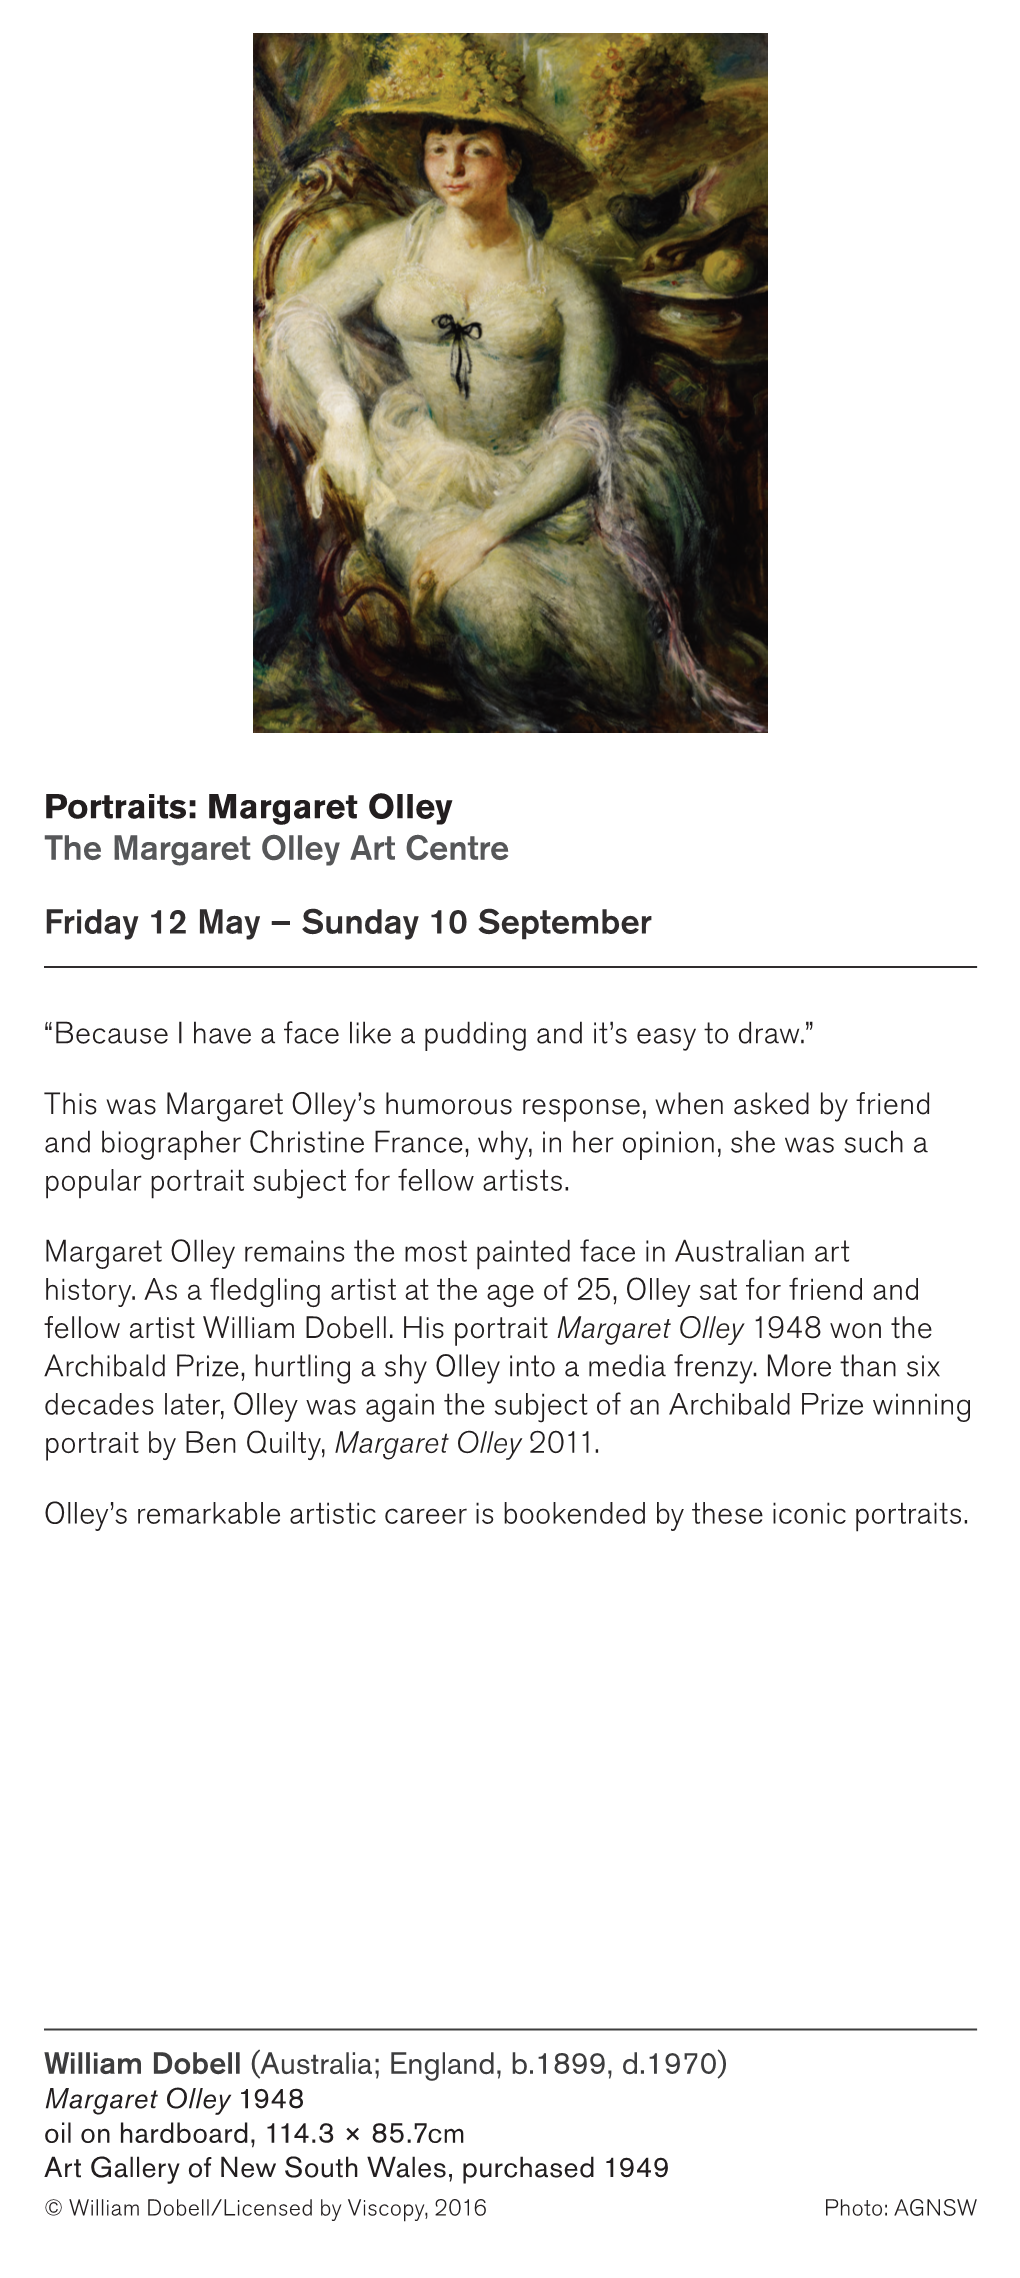 Portraits: Margaret Olley the Margaret Olley Art Centre